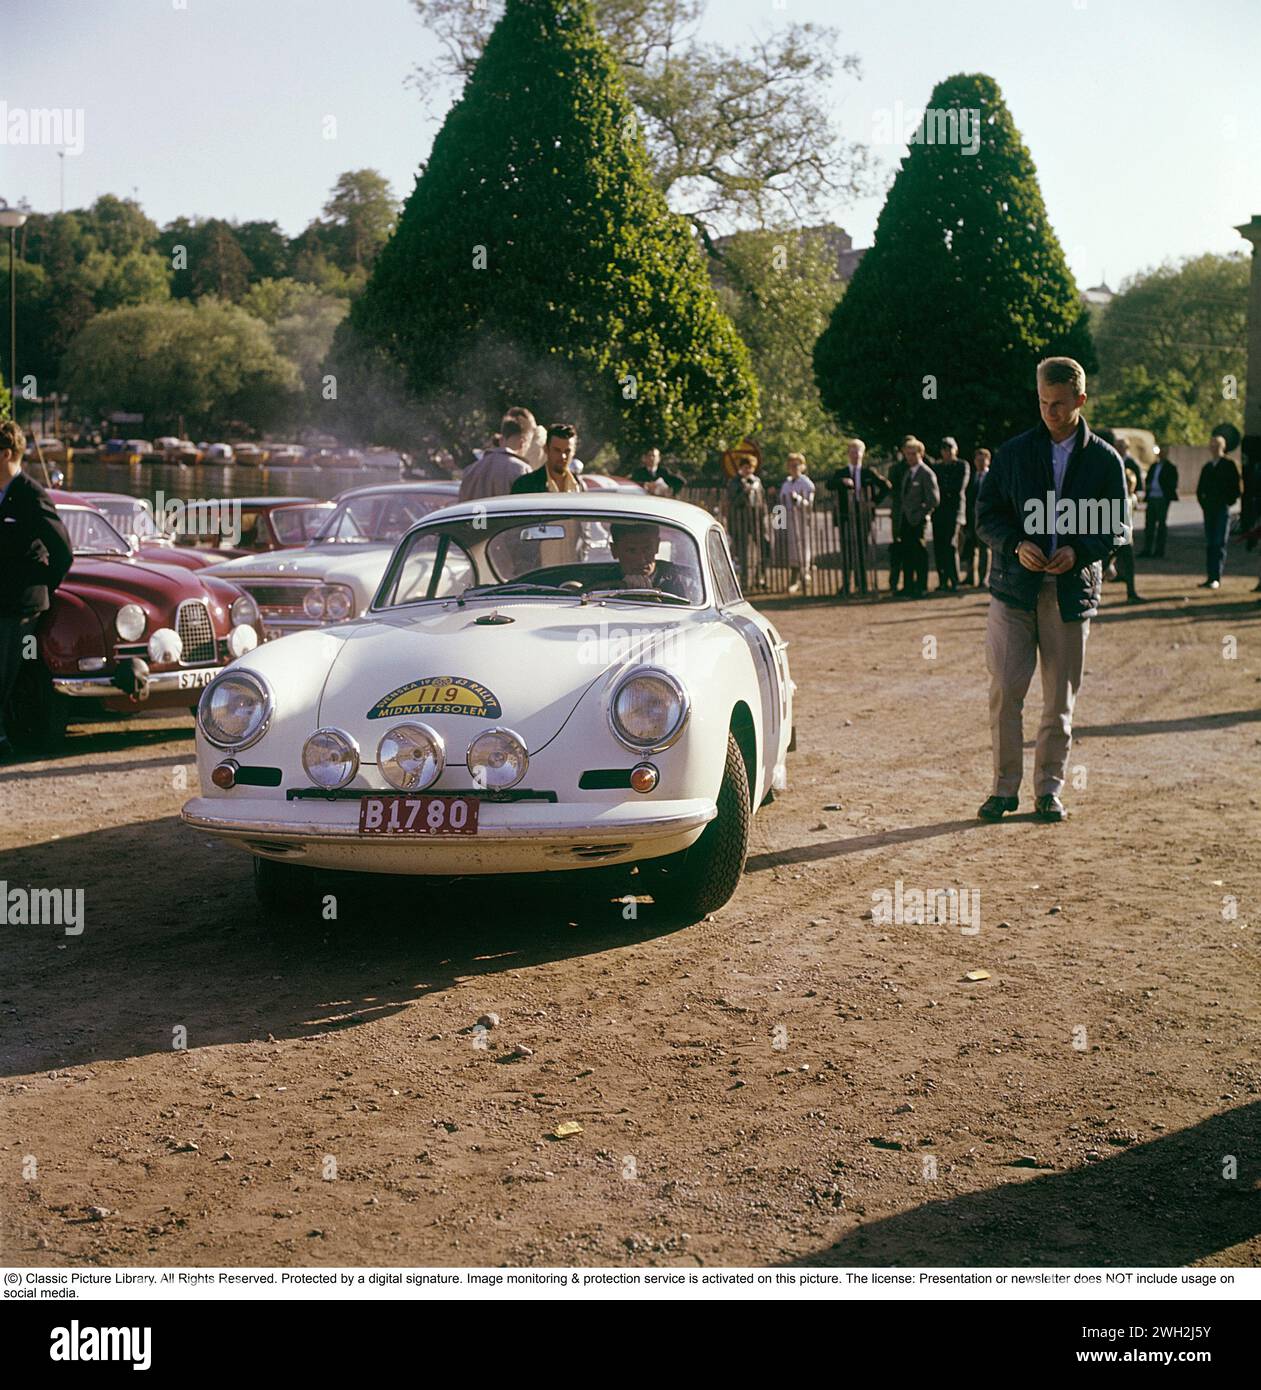 Midnight Sun Rally 1963. A car race that was first run in 1950 and last time in 1964. The rally was founded in 1950 by car director Ernst S. Nilson. Here, Berndt Jansson at the start at Karlberg Castle on June 18, 1963. He drives a Porsche 356 Carrera 2 GT and also wins this year's edition of the rally. Conard ref CV35, 36, 37 Stock Photo